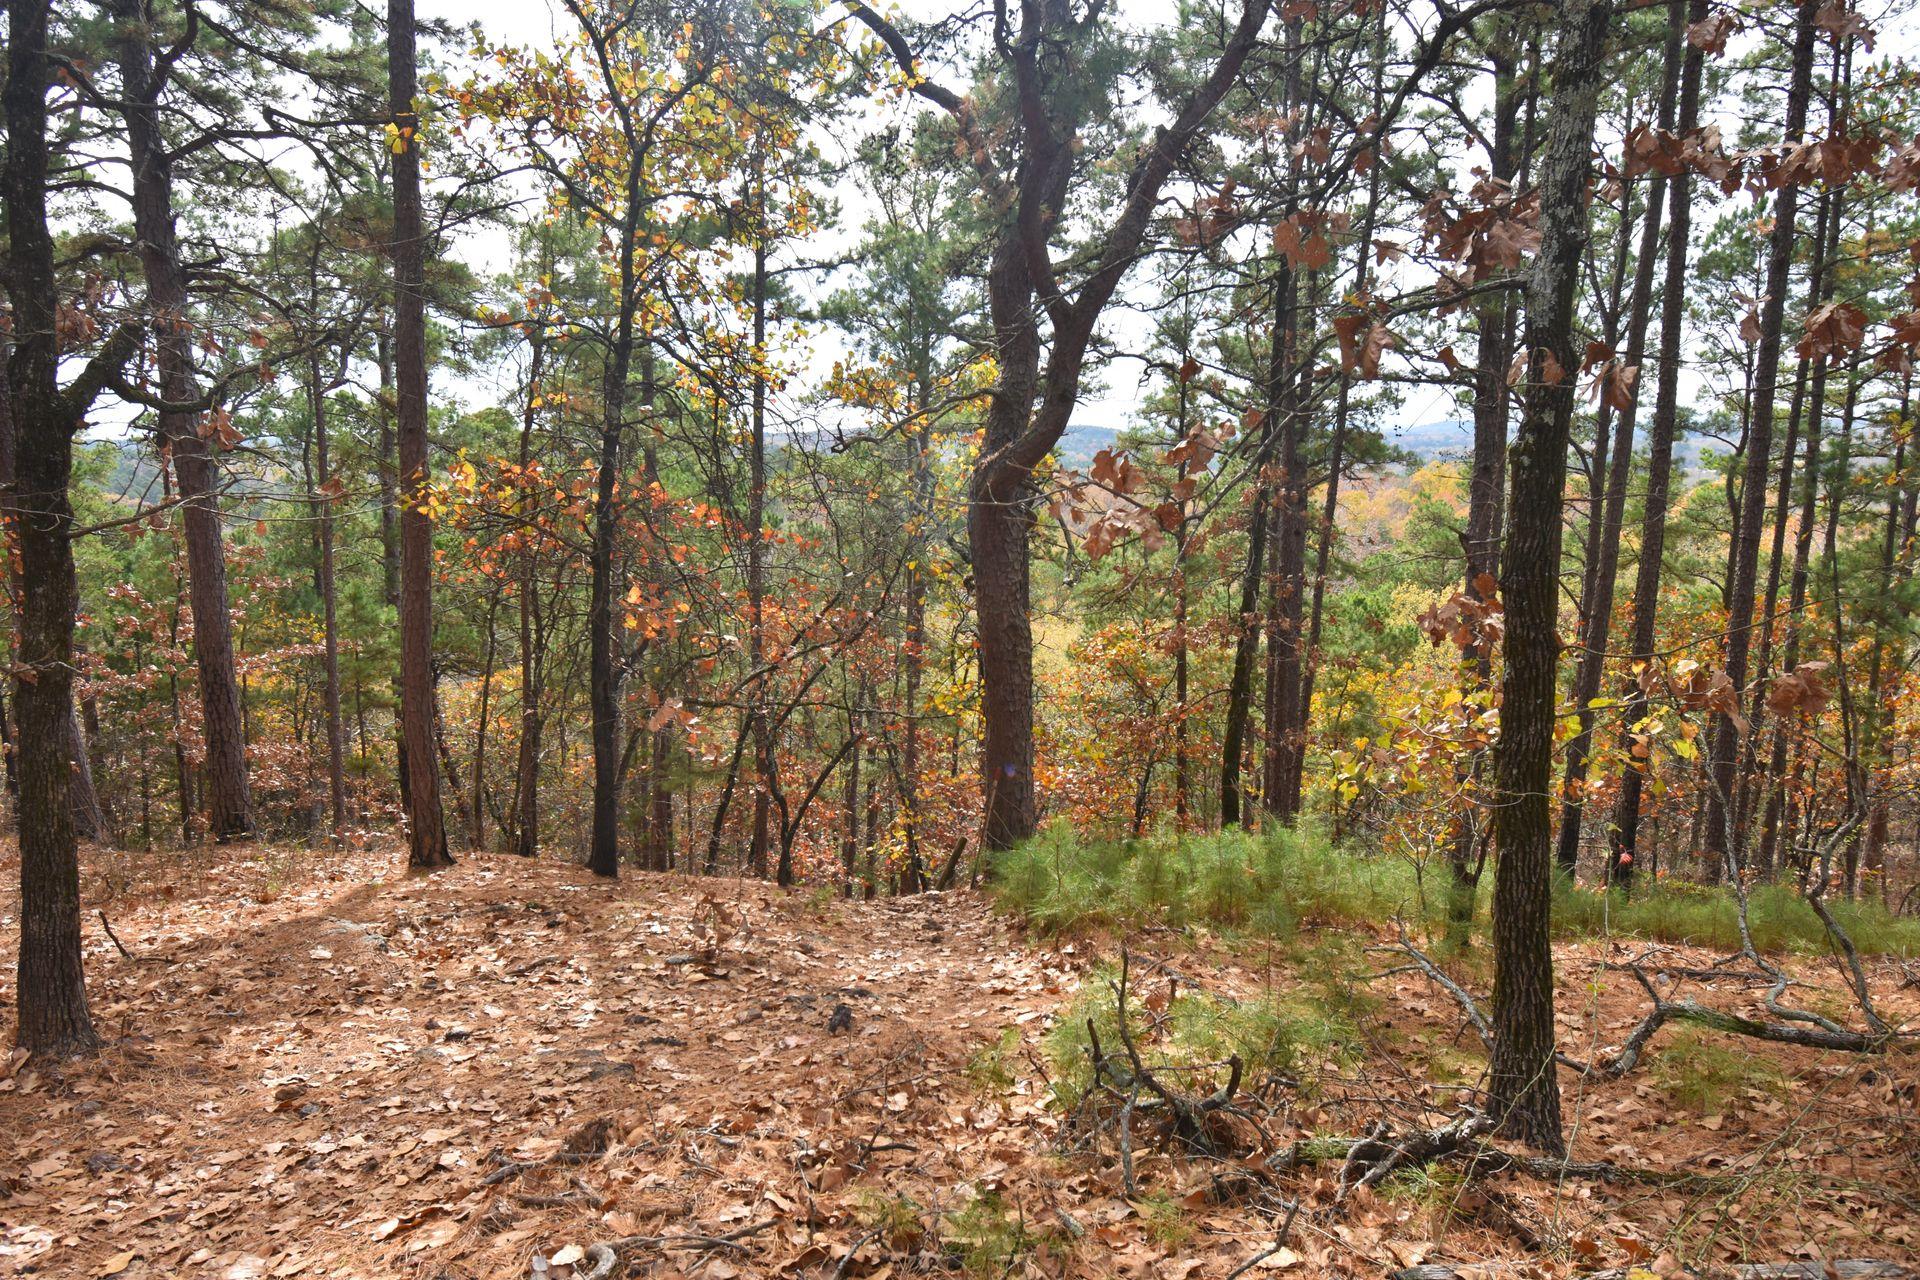 A view of trees with colorful fall foliage in Daingerfield State Park.